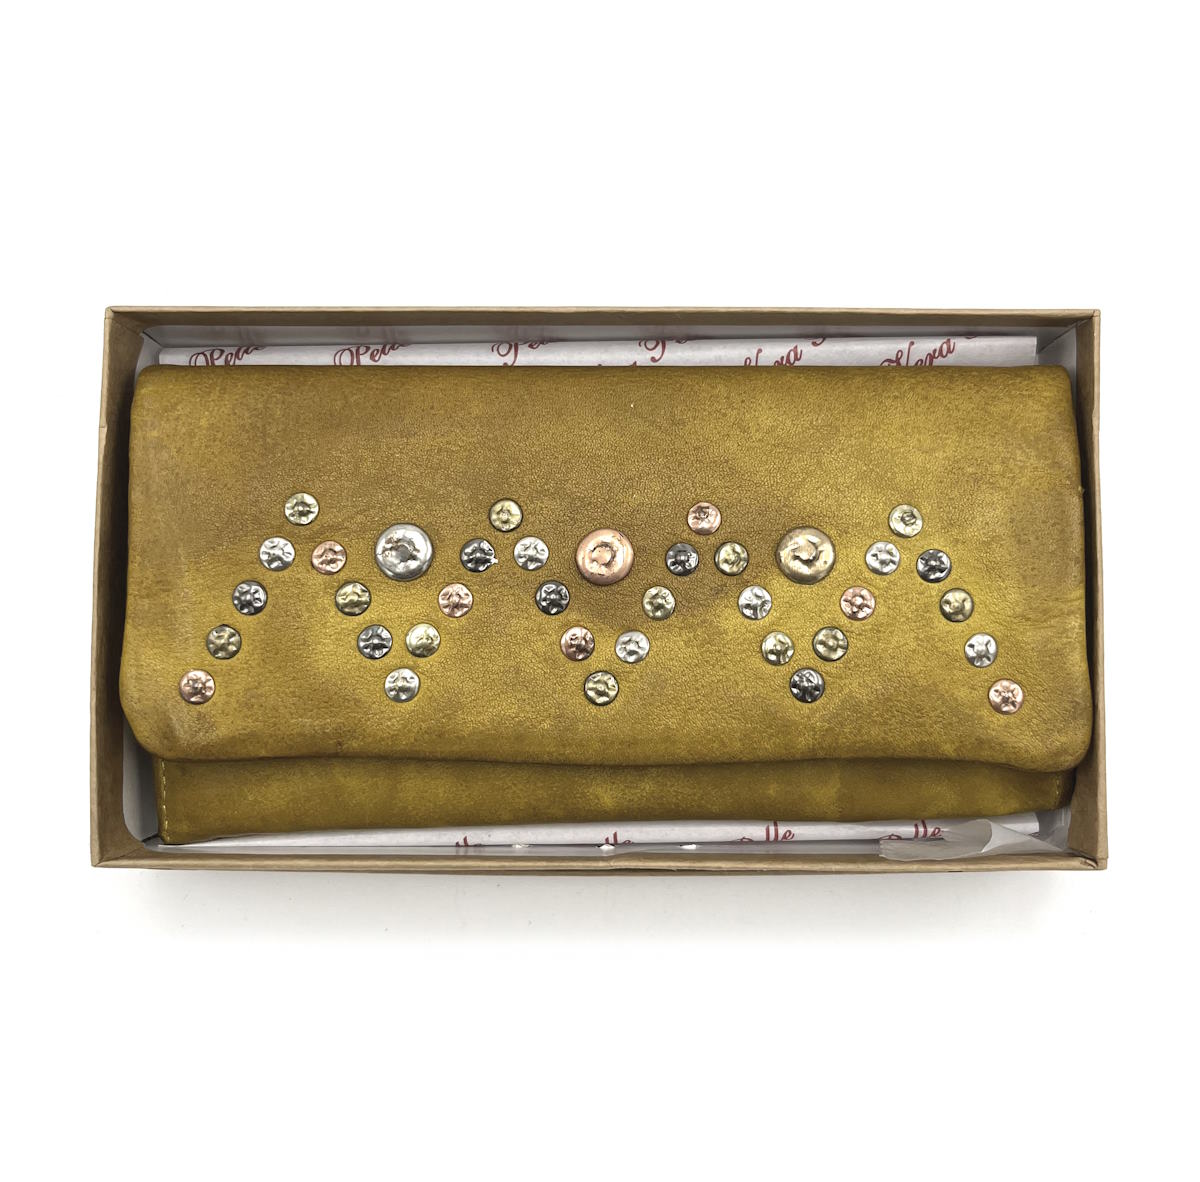 Wallet in washed leather, vintage effect with rivets, art. 1033-JU02.422